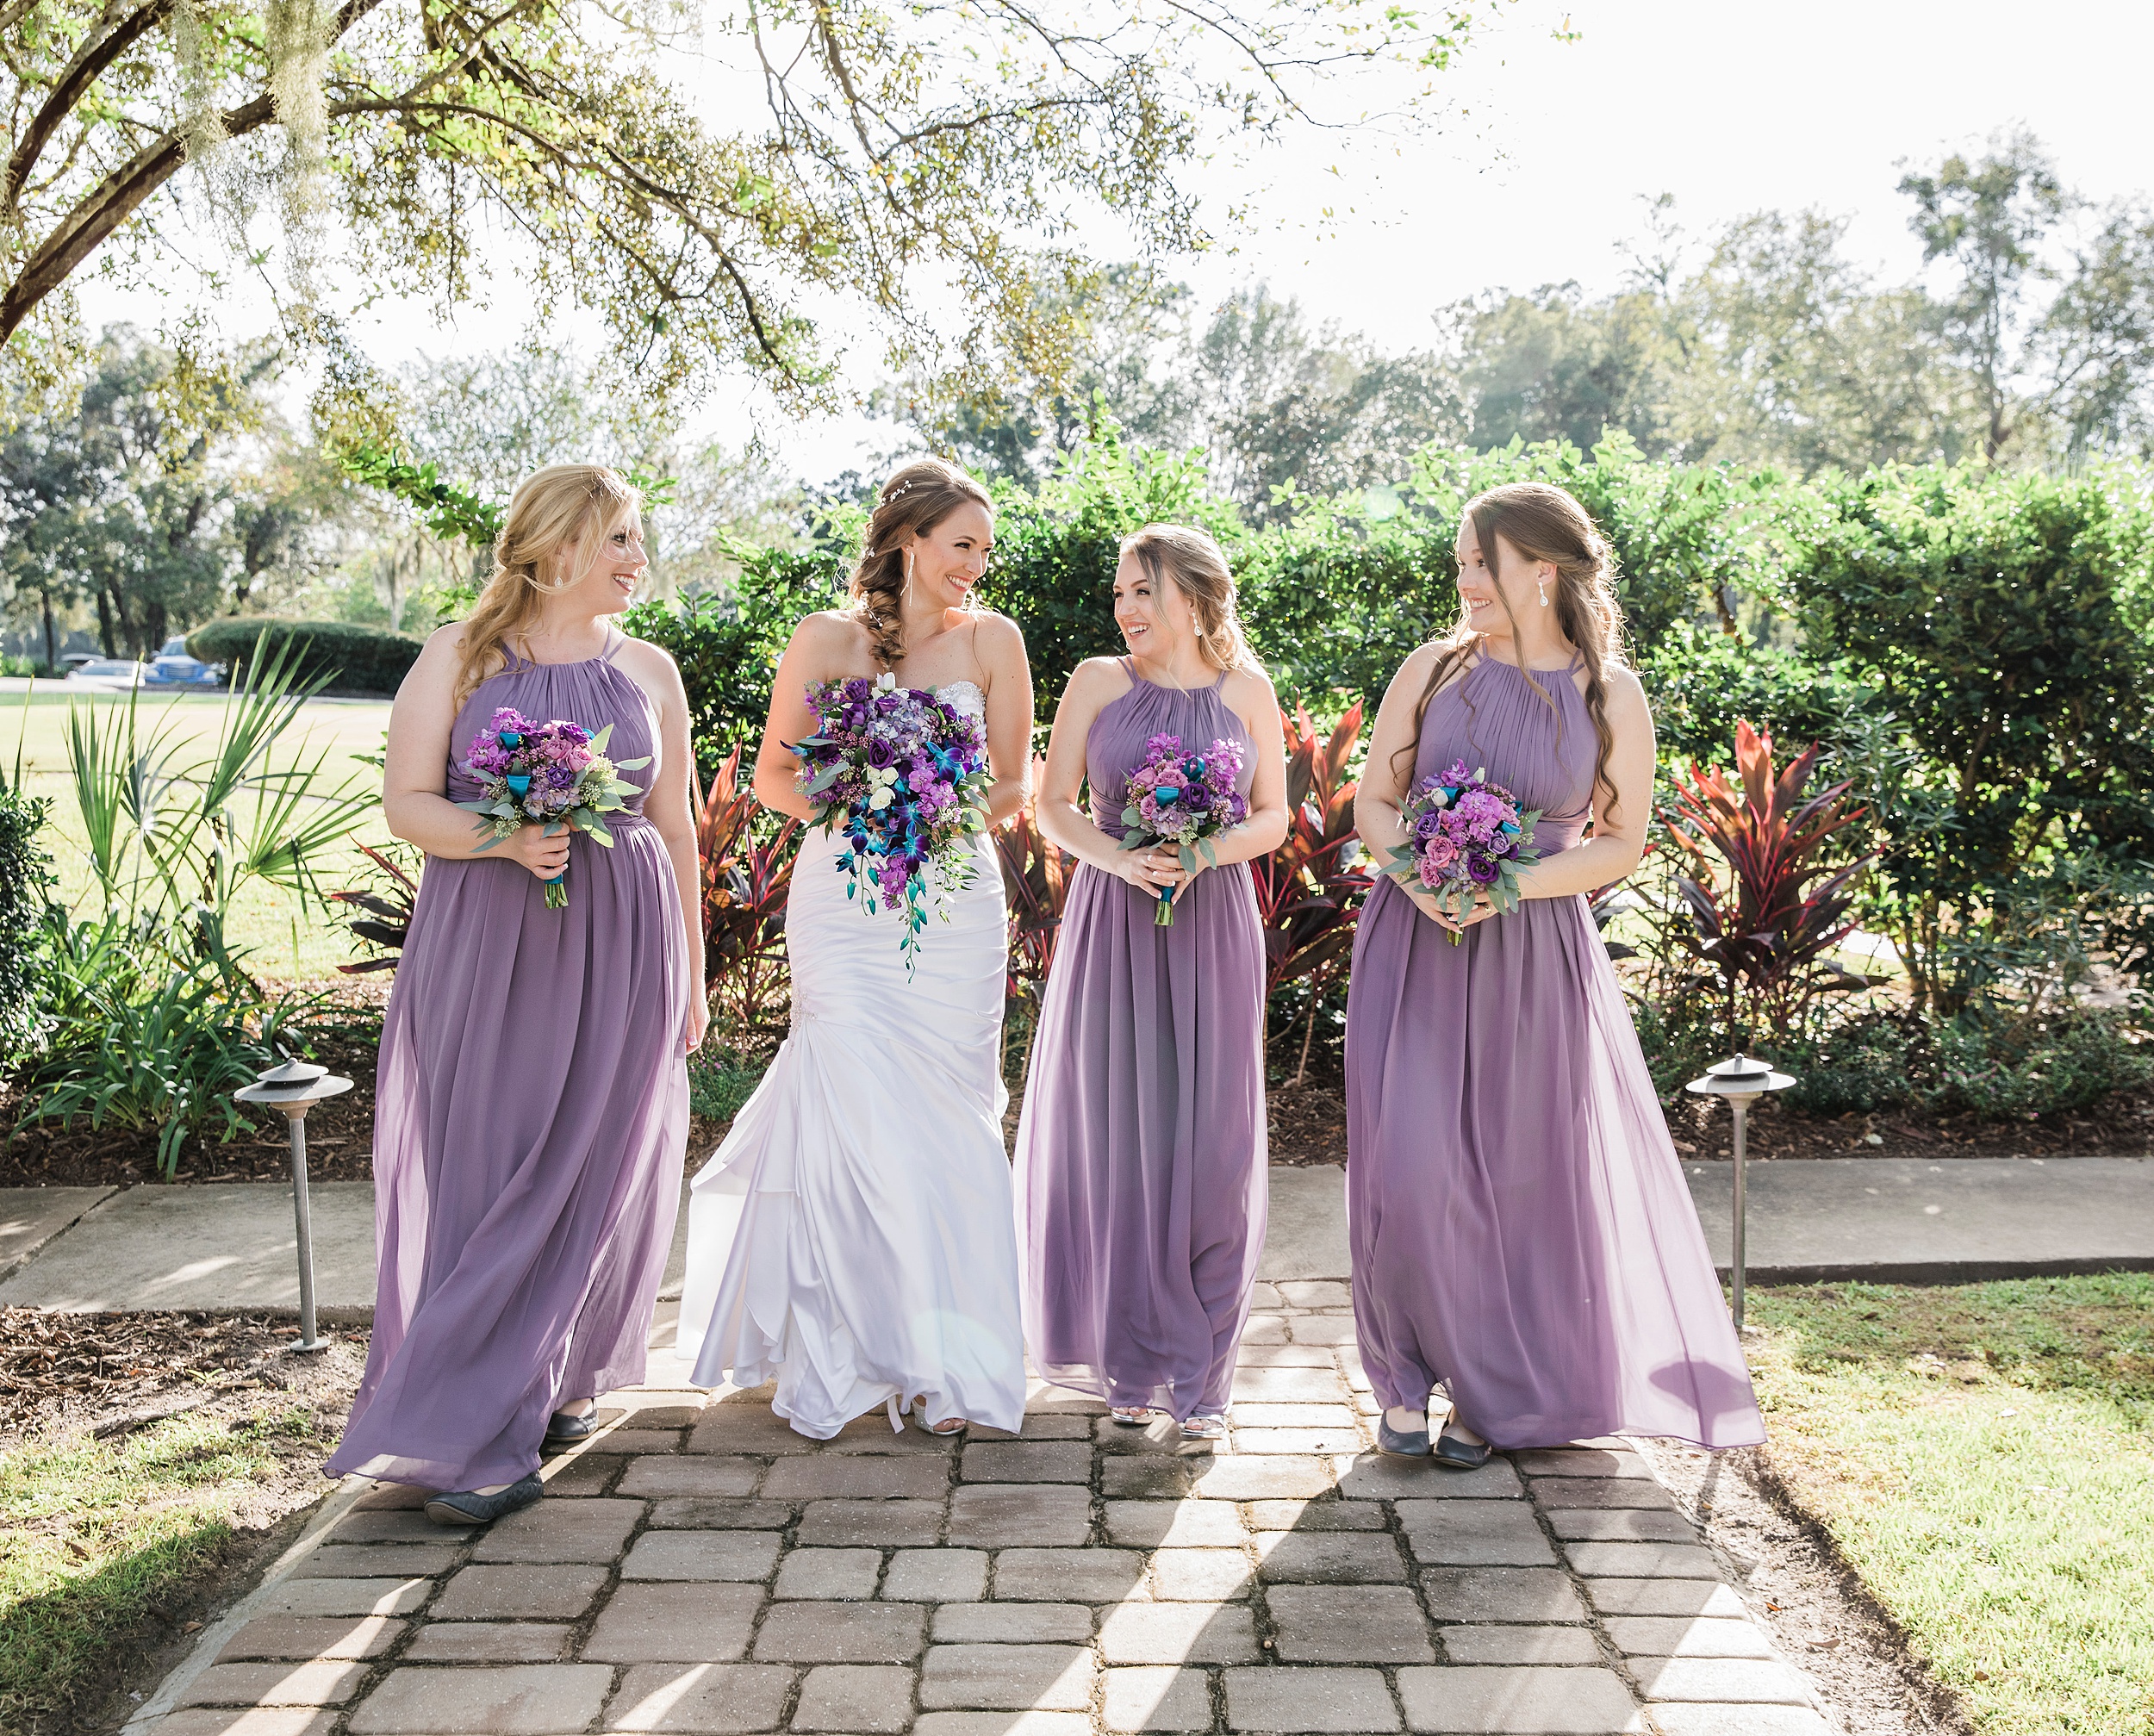 A bride laughs with her bridesmaids in purple dresses while walking through a garden path